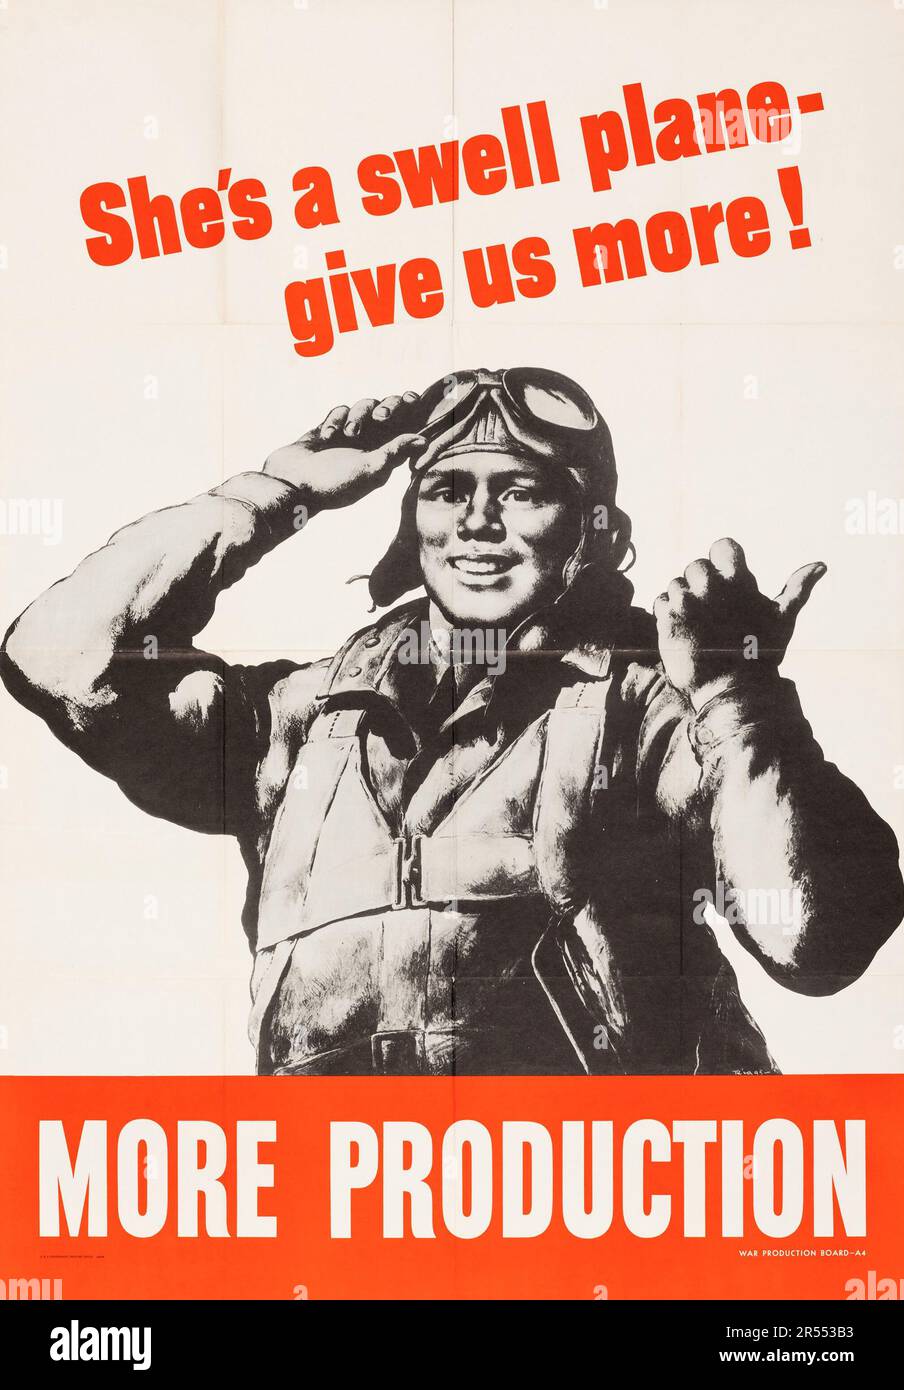 MORE PRODUCTION - American World War II Propaganda (U.S. Government Printing Office, 1942). 'She's a Swell Plane- Give Us More,' Robert Riggs Artwork Stock Photo